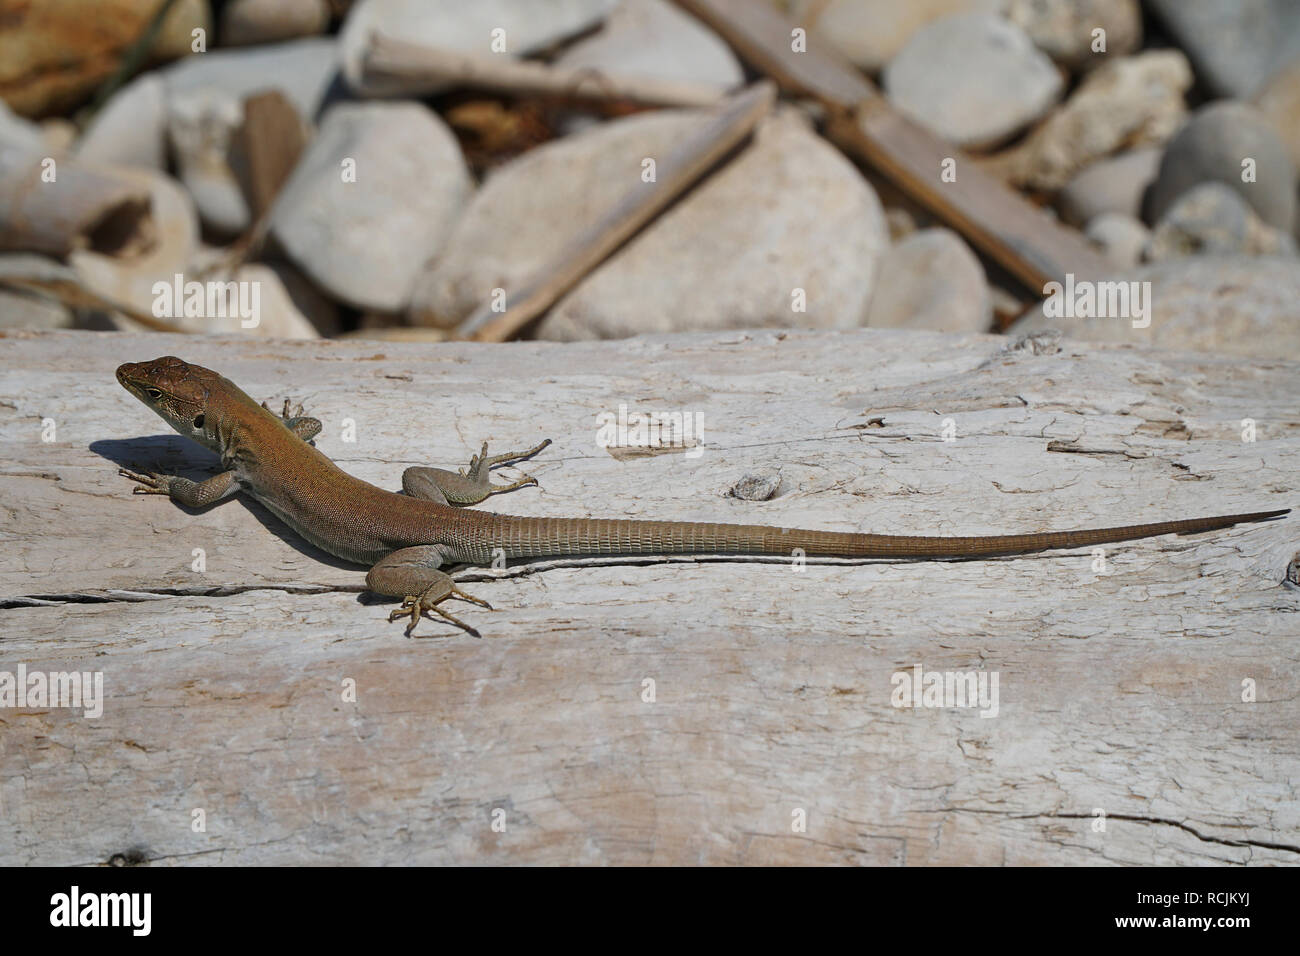 Italian Wall Lizard , Podarcis waglerianus or Podarcis siculus resting on a weathered piece of driftwood in the hot sun Stock Photo